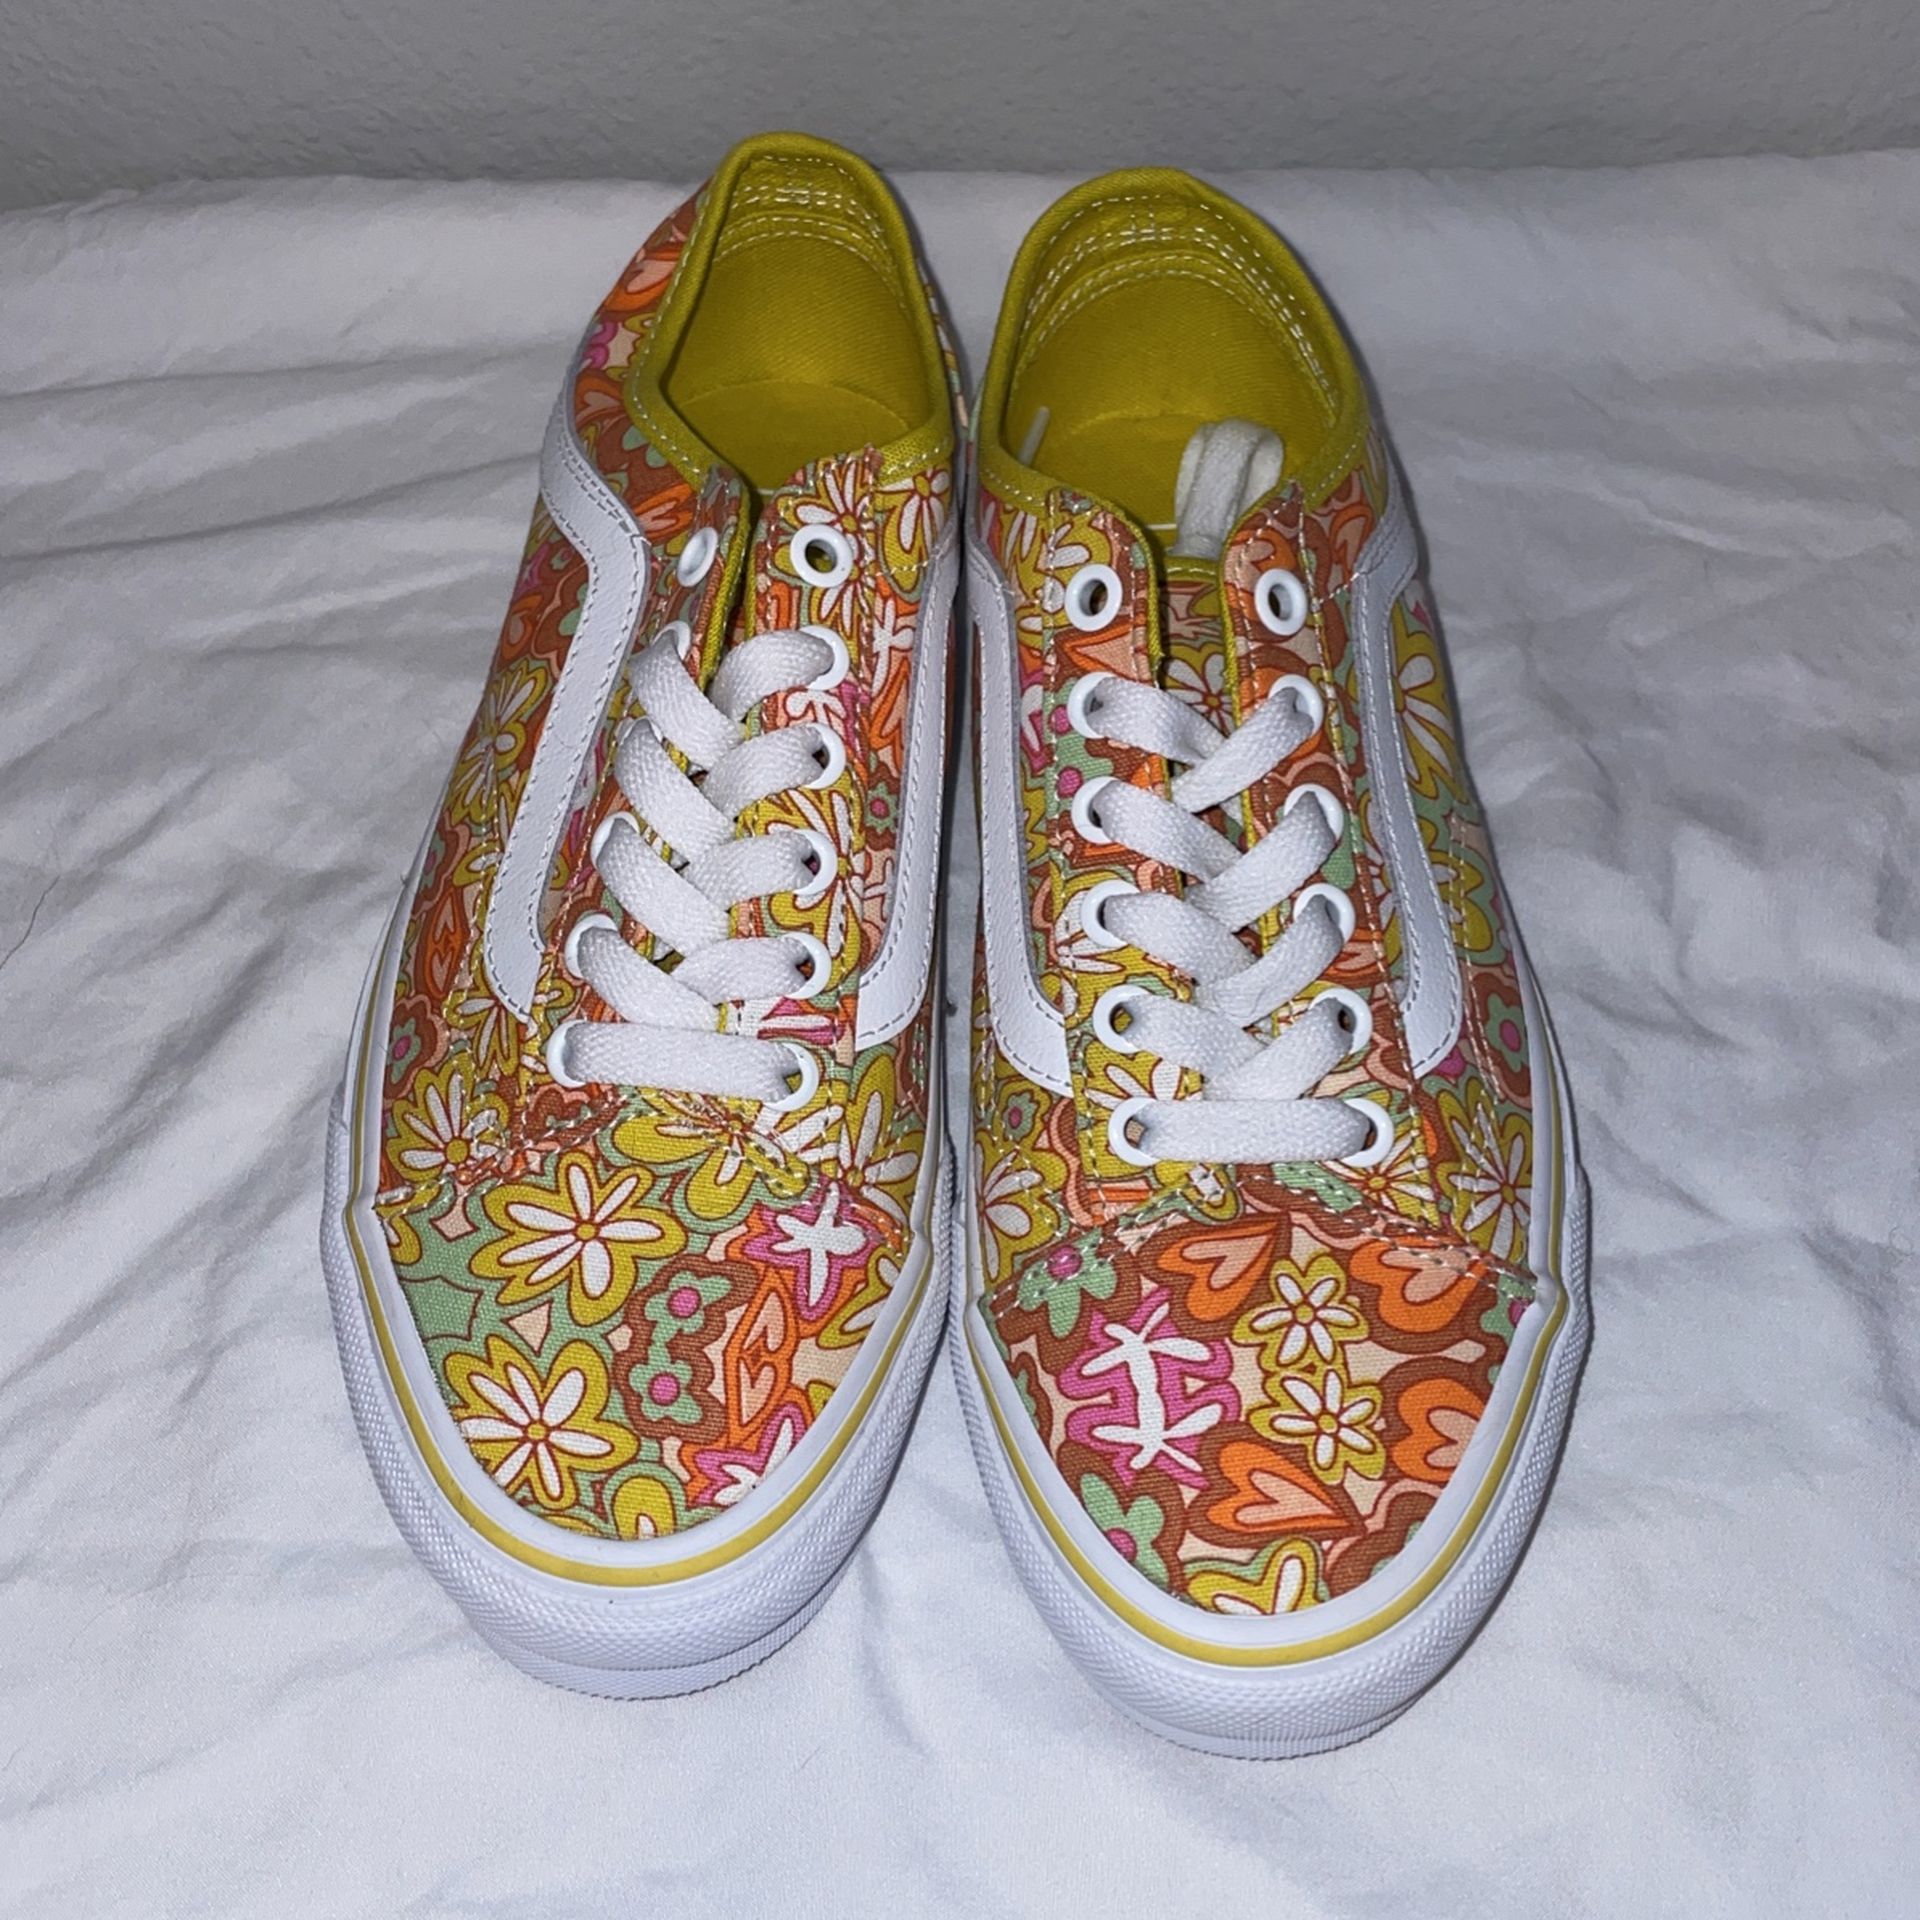 Vans With Flower And Heart Pattern